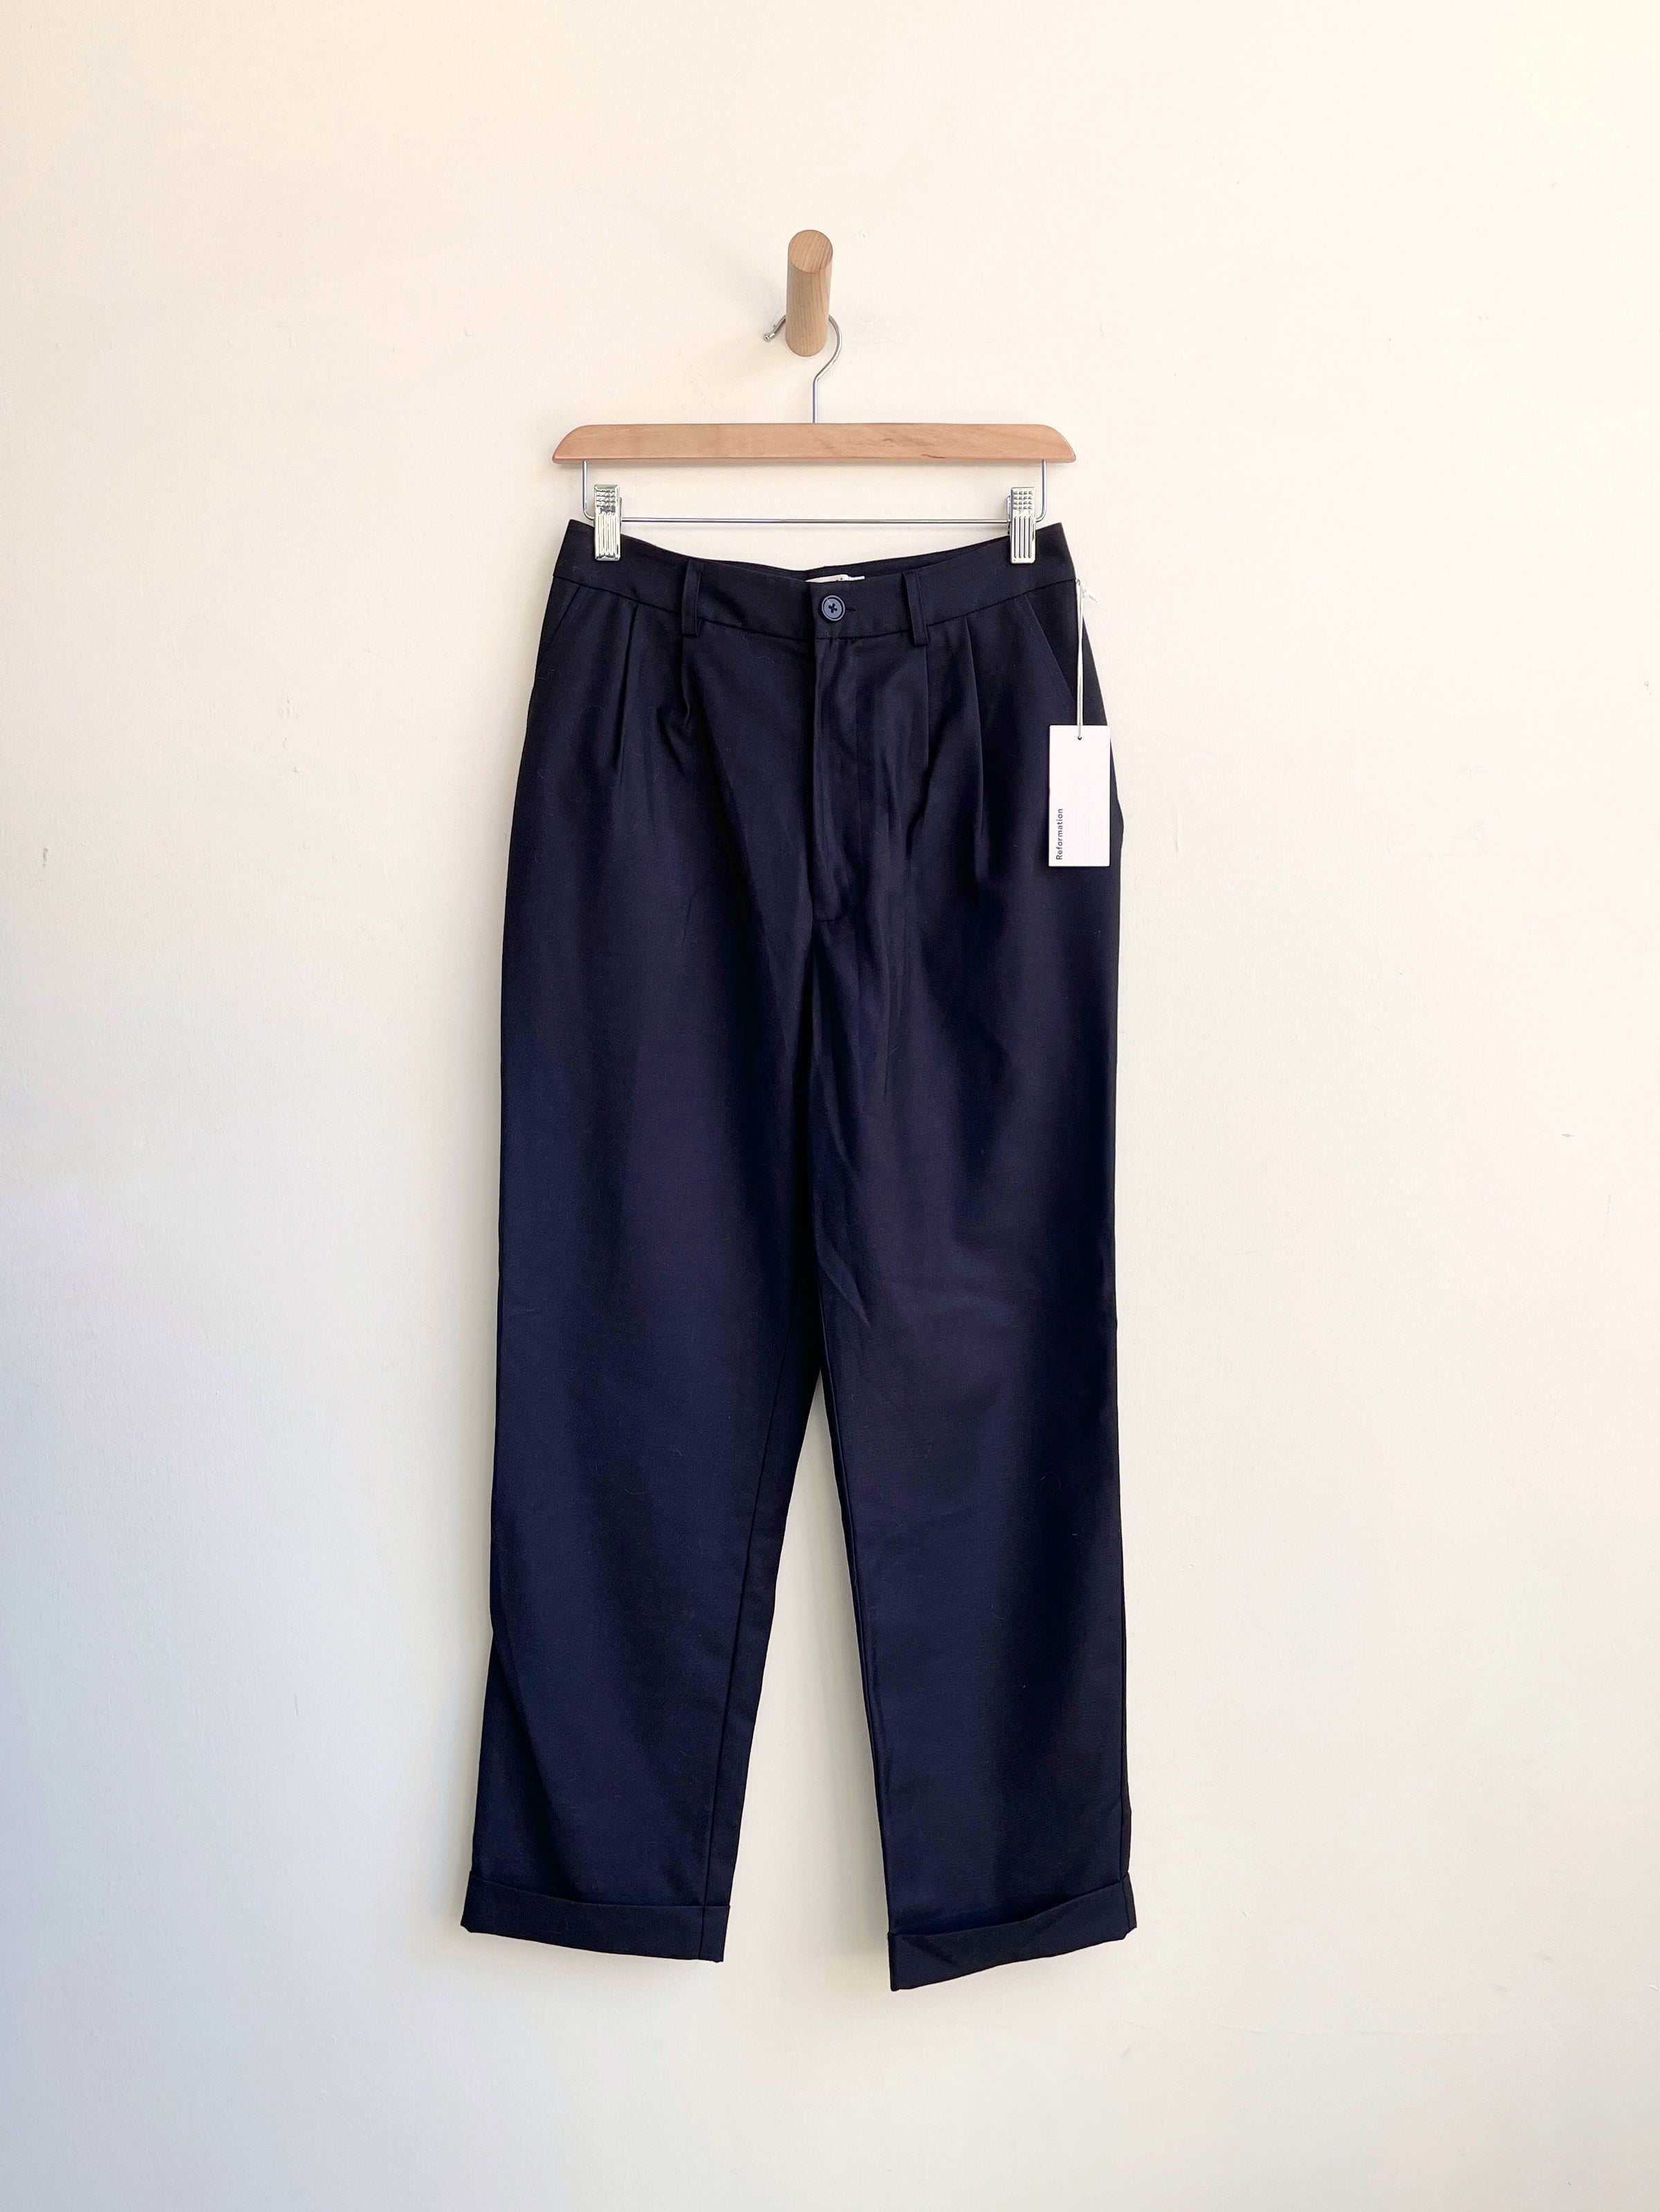 Reformation Arie pants